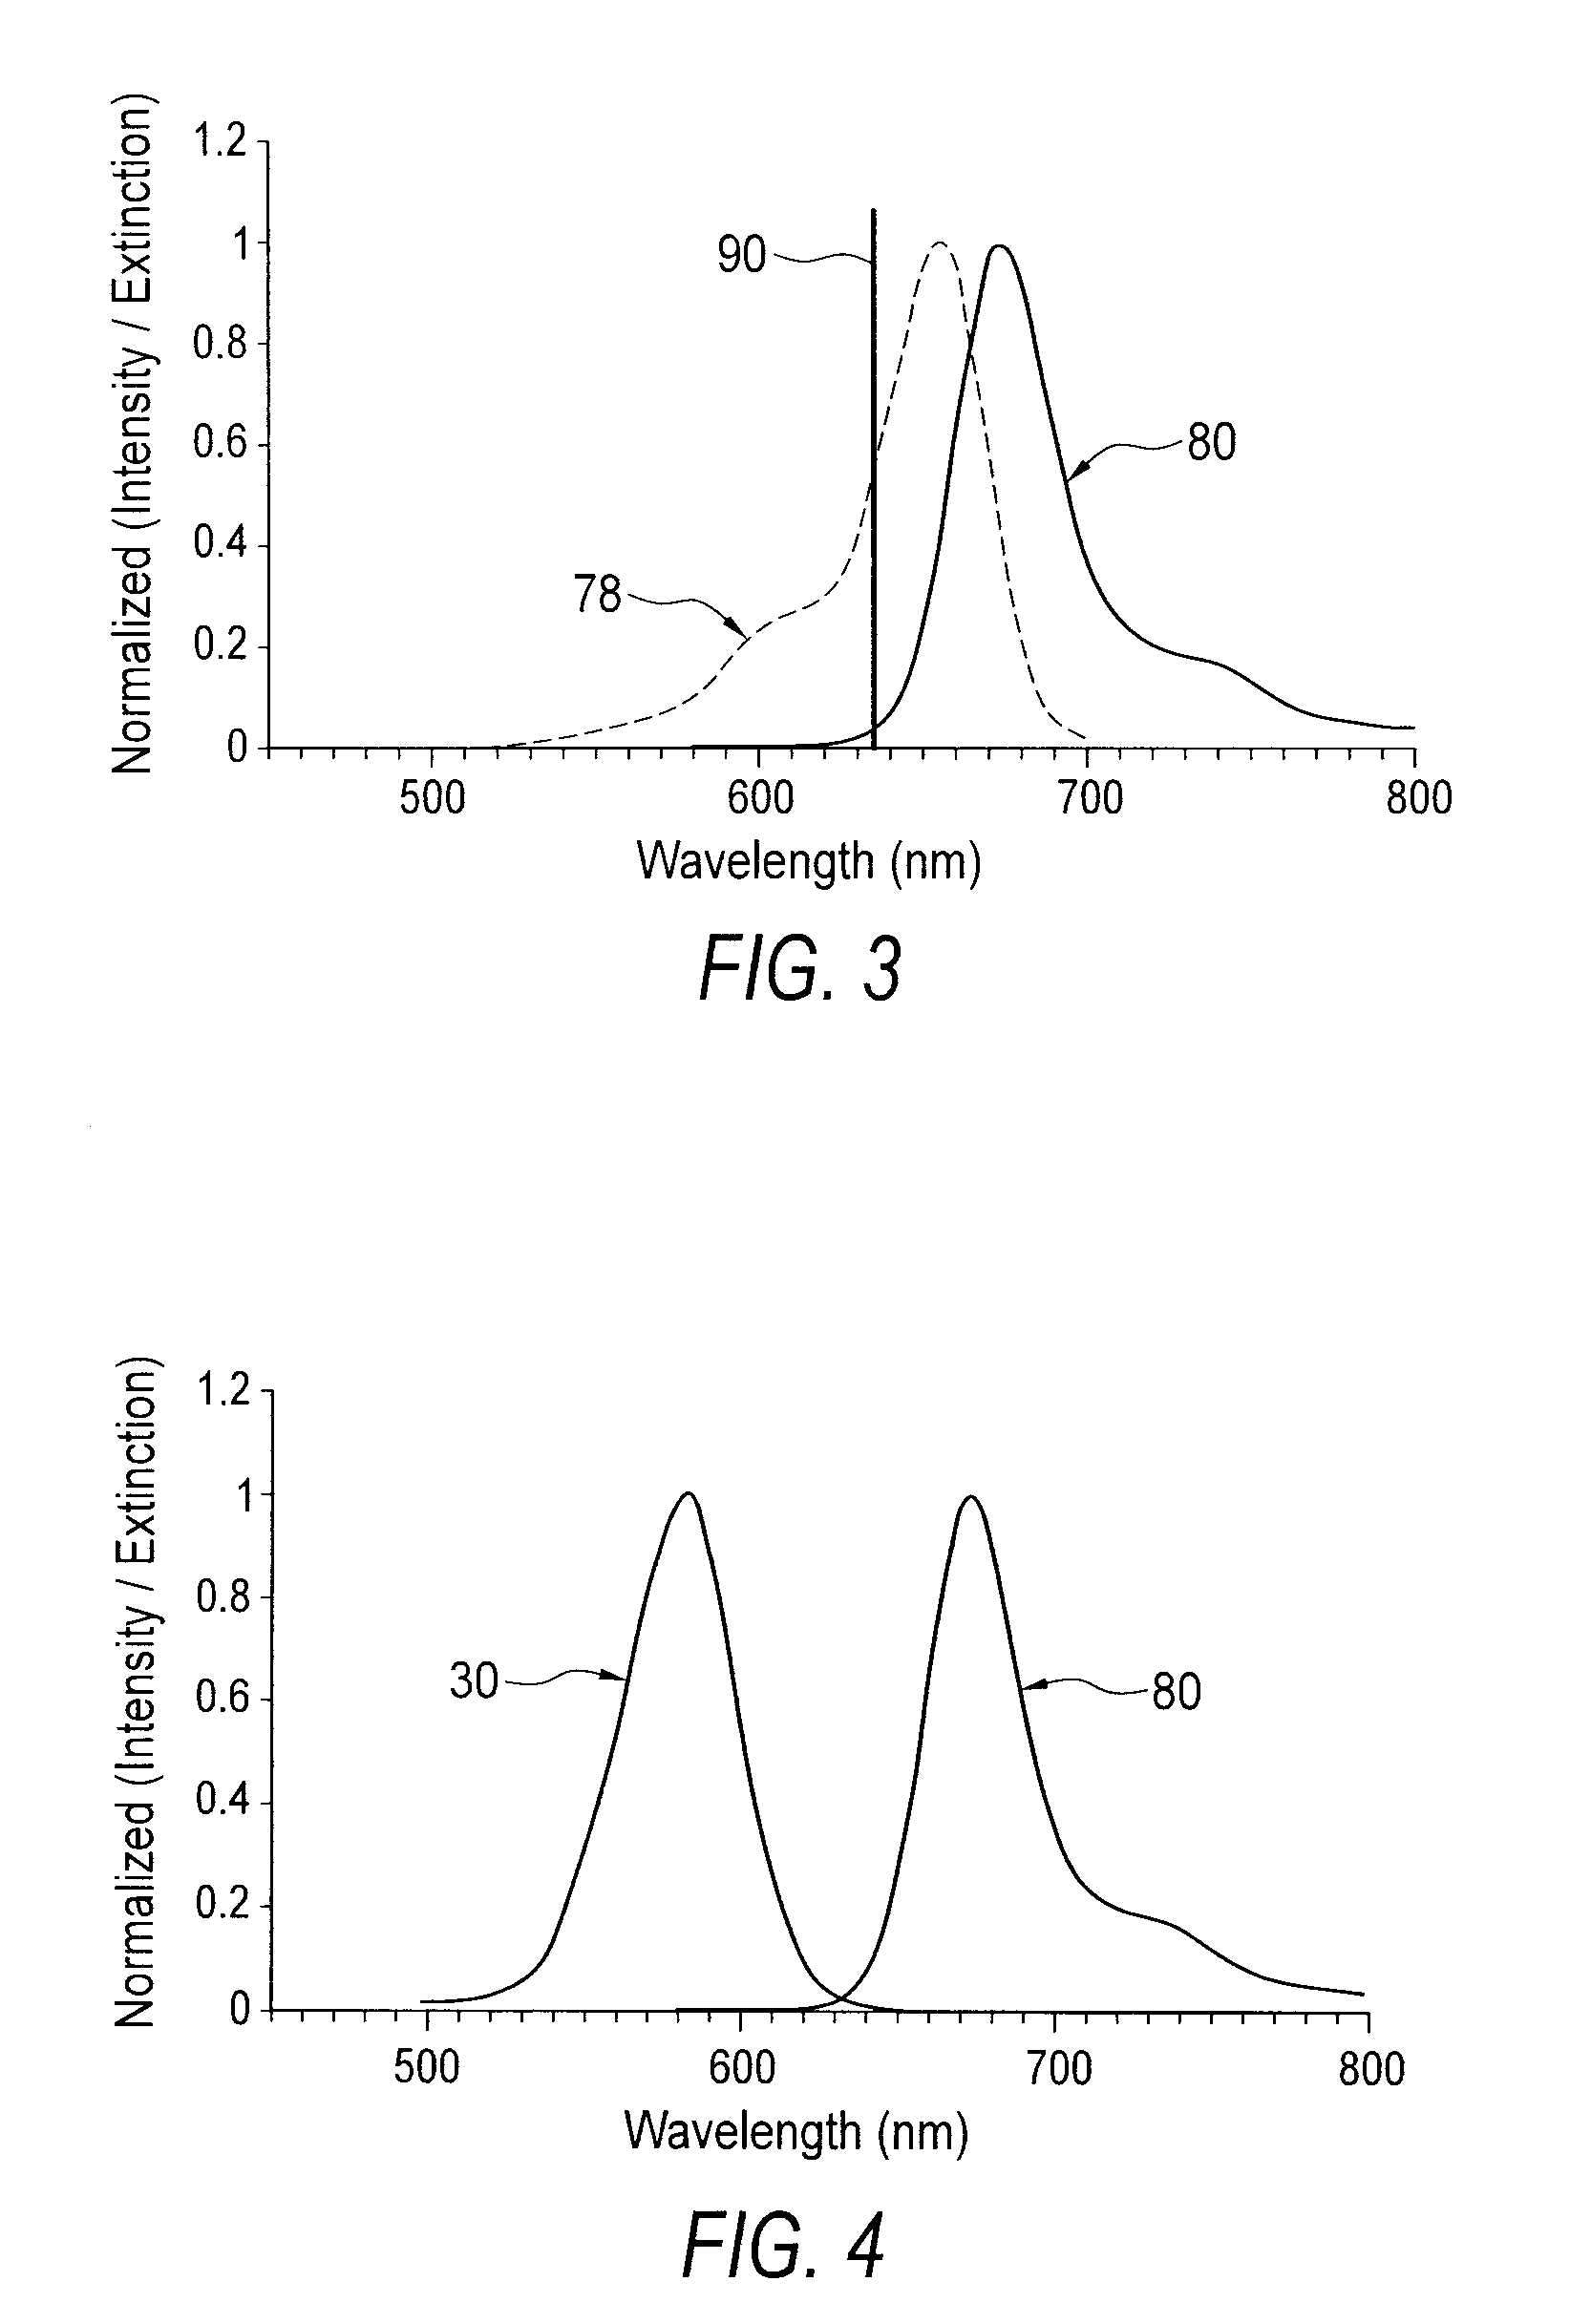 Systems and methods for enhancing fluorescent detection of target molecules in a test sample